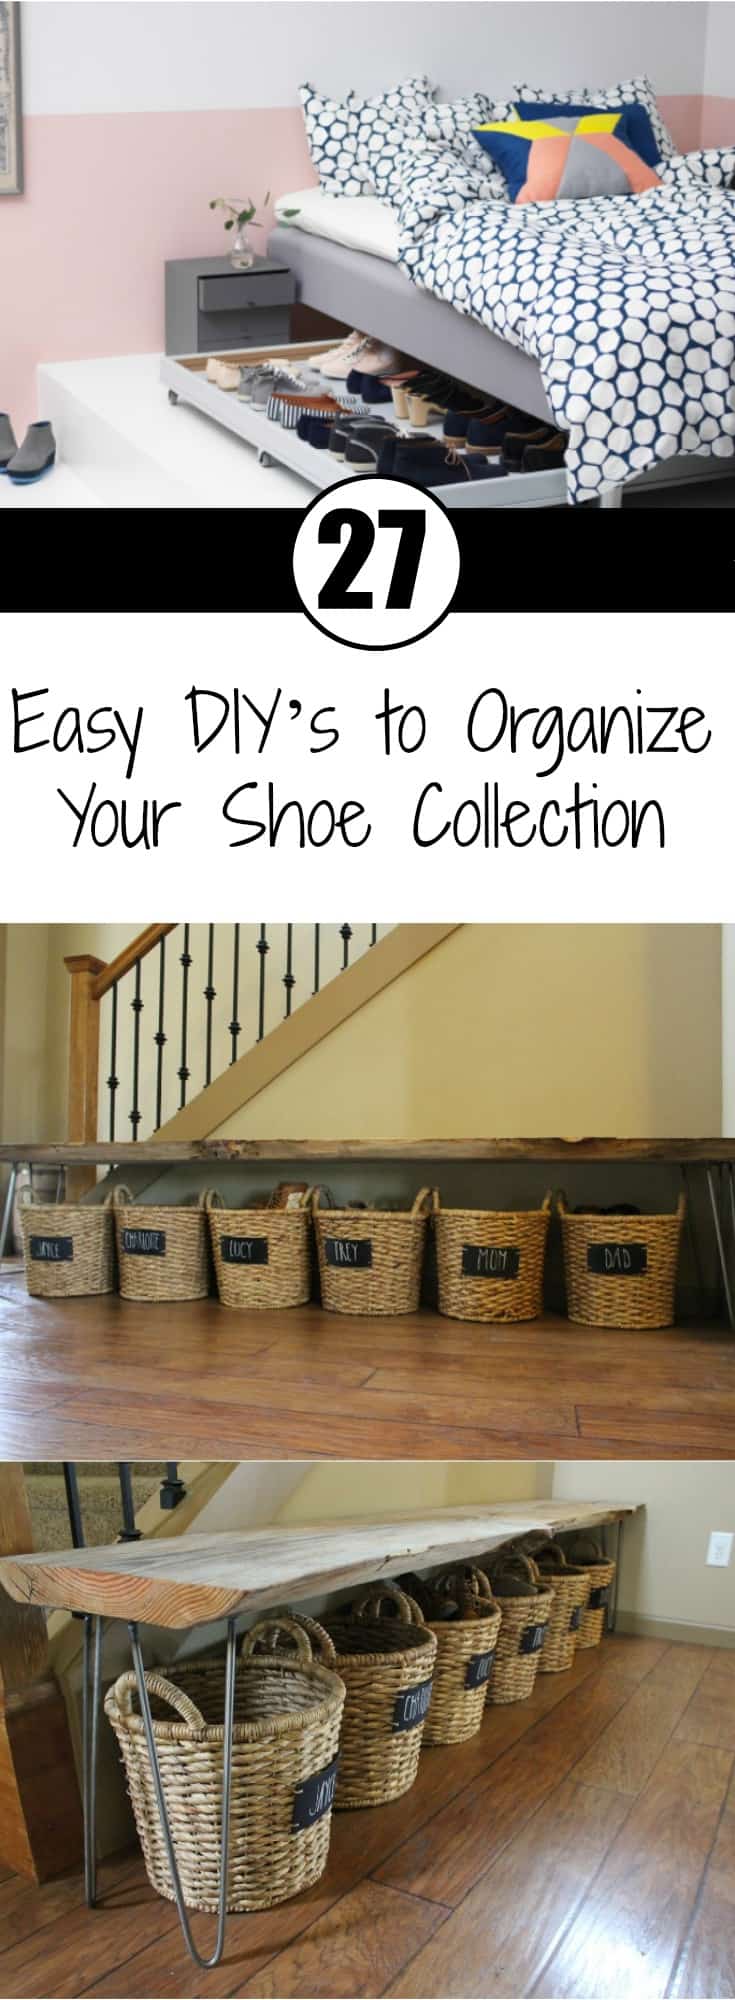 27 Easy DIY's to Organize Your Shoe Collection